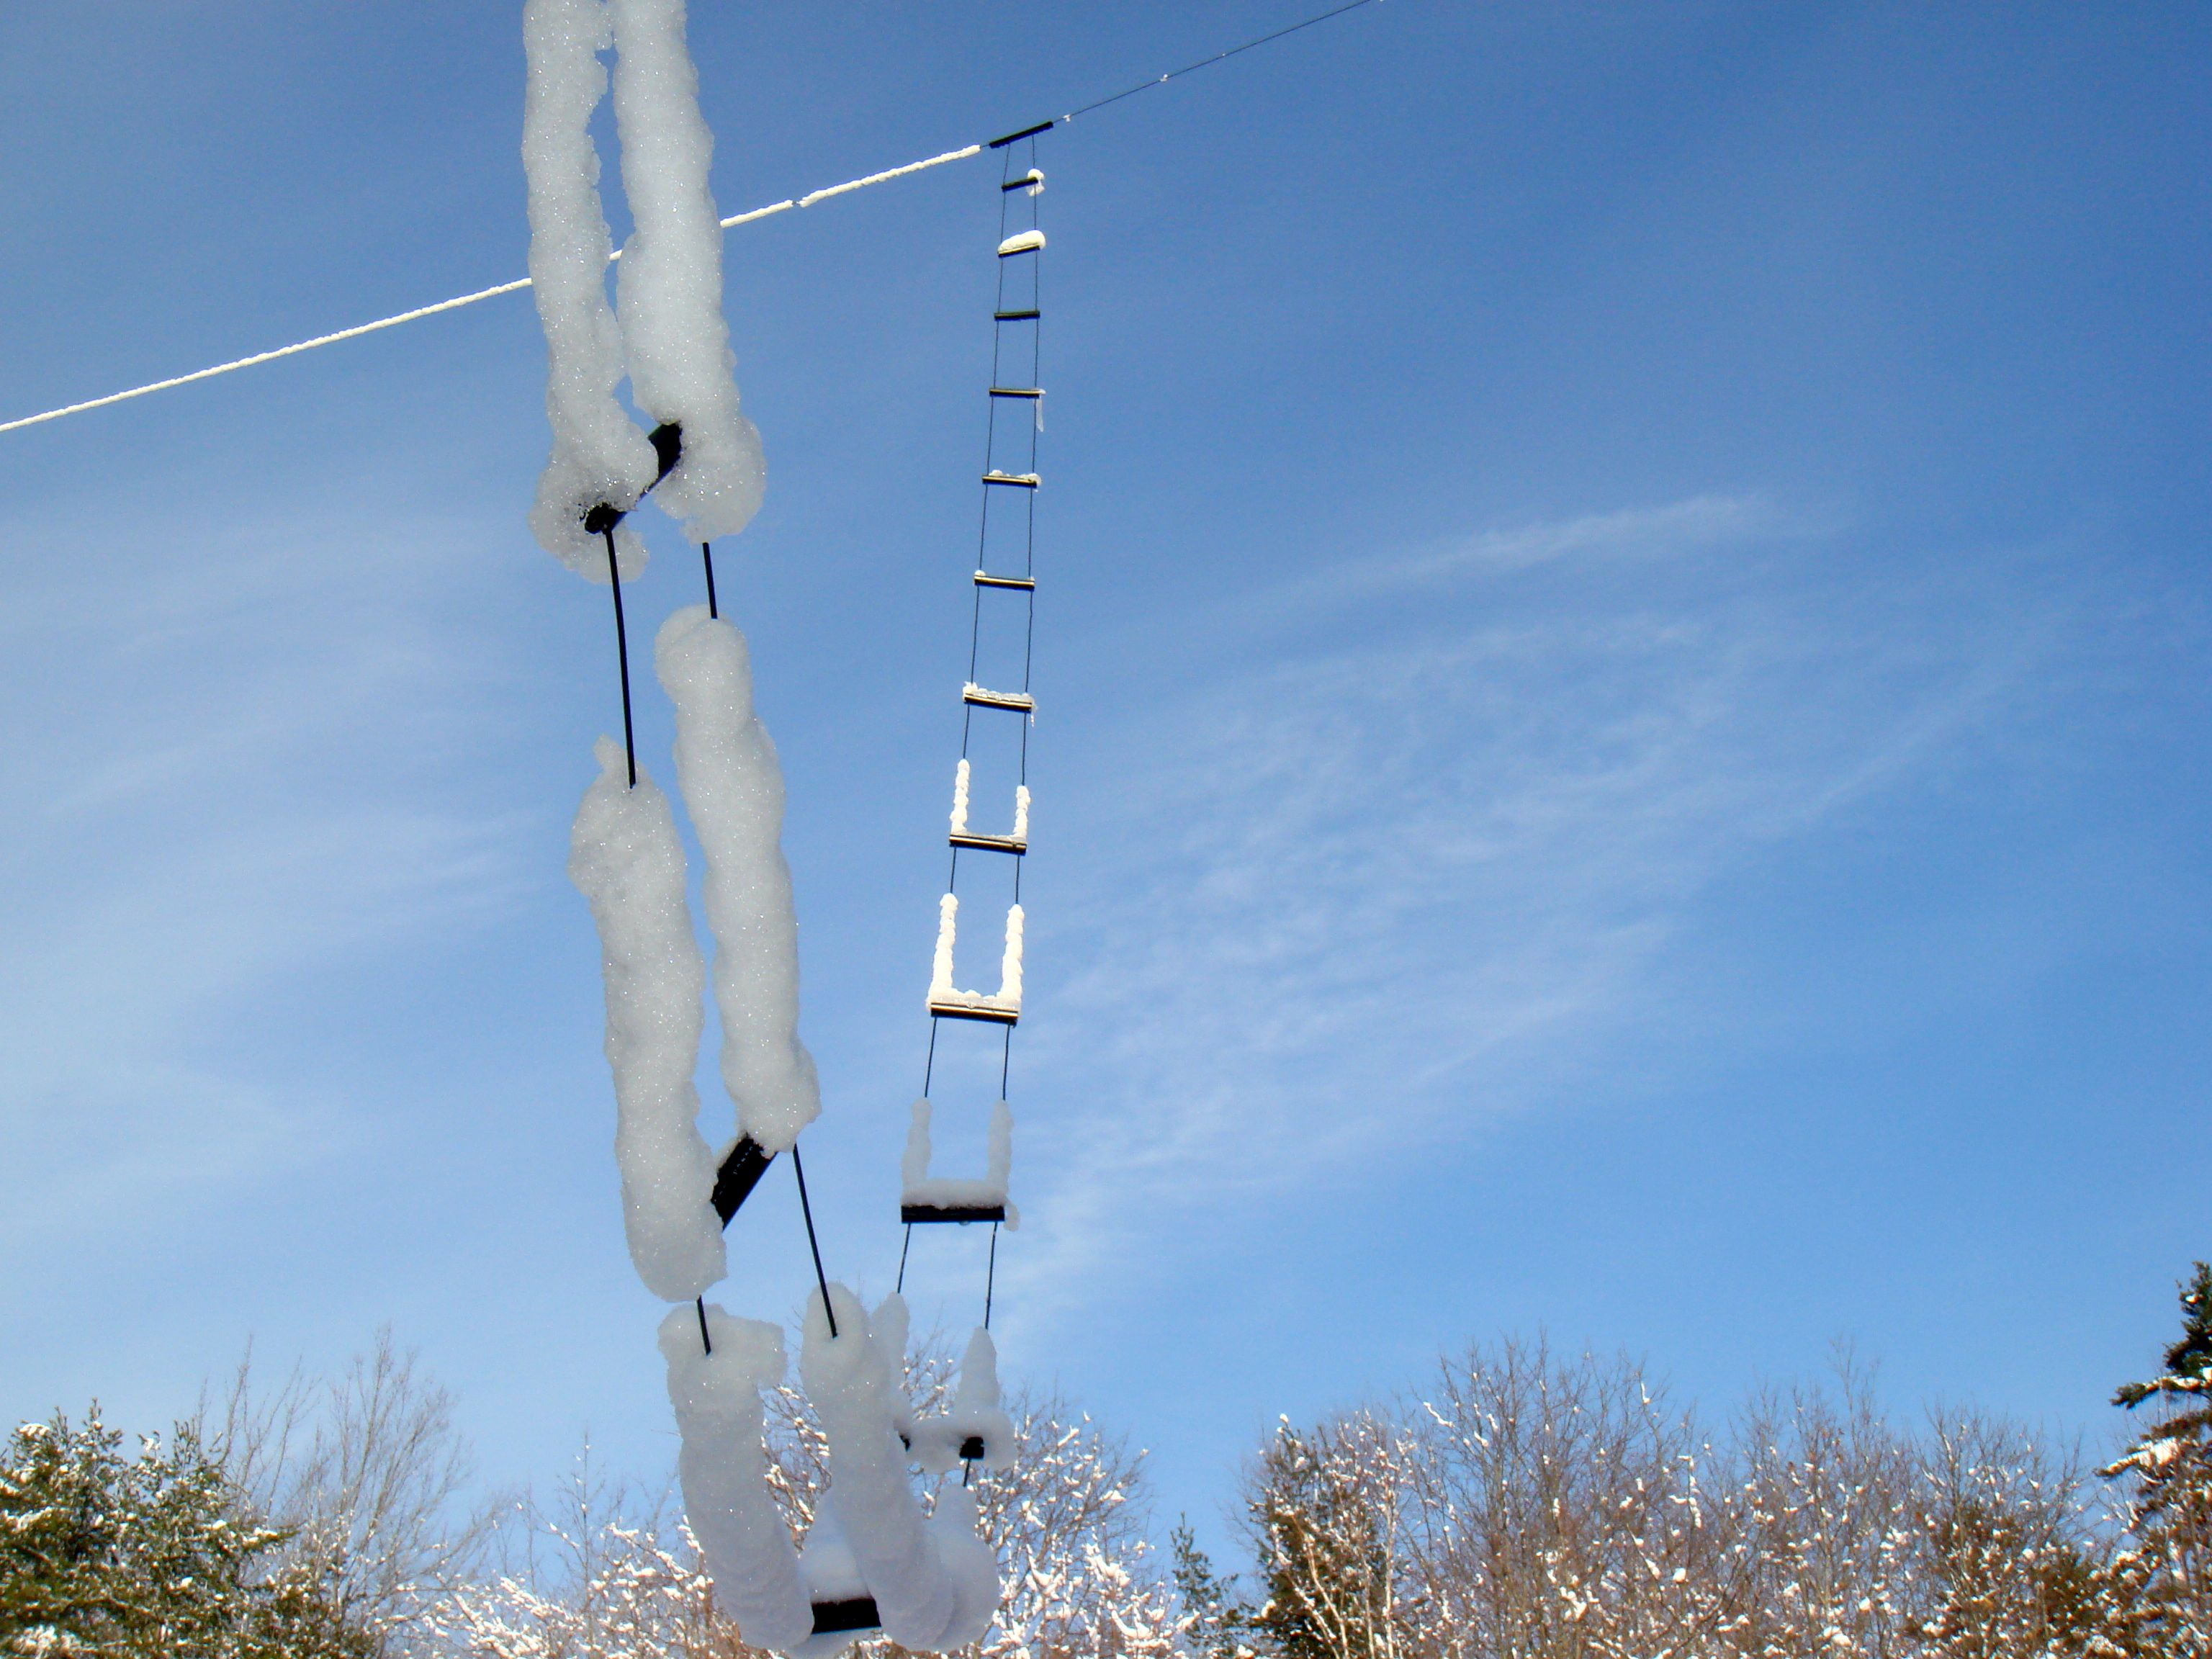 January 5, 2008 – The White Stuff On The Antenna